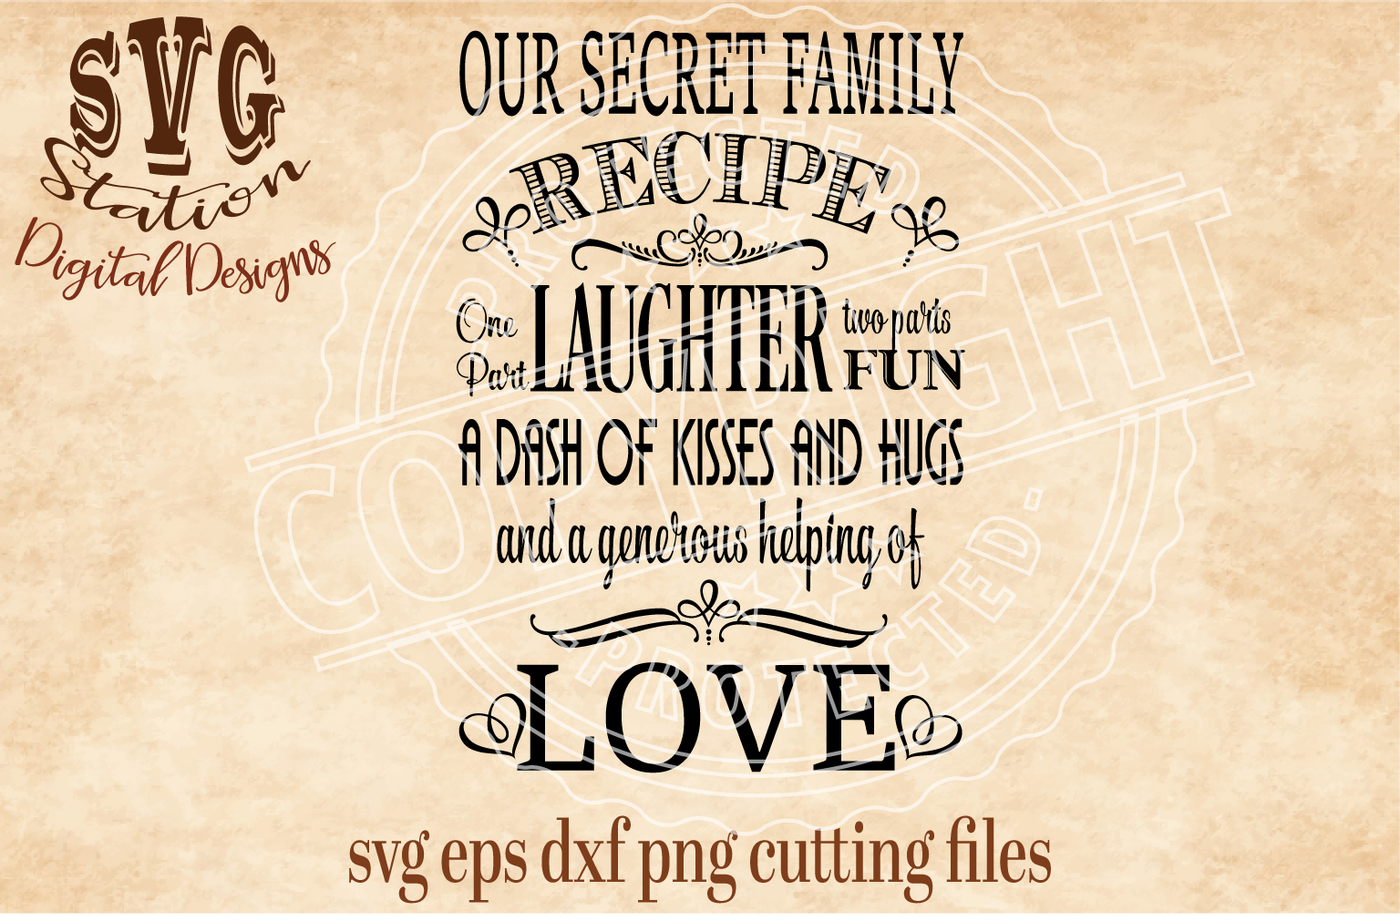 Our Secret Family Recipe / SVG DXF PNG EPS Cutting File ...